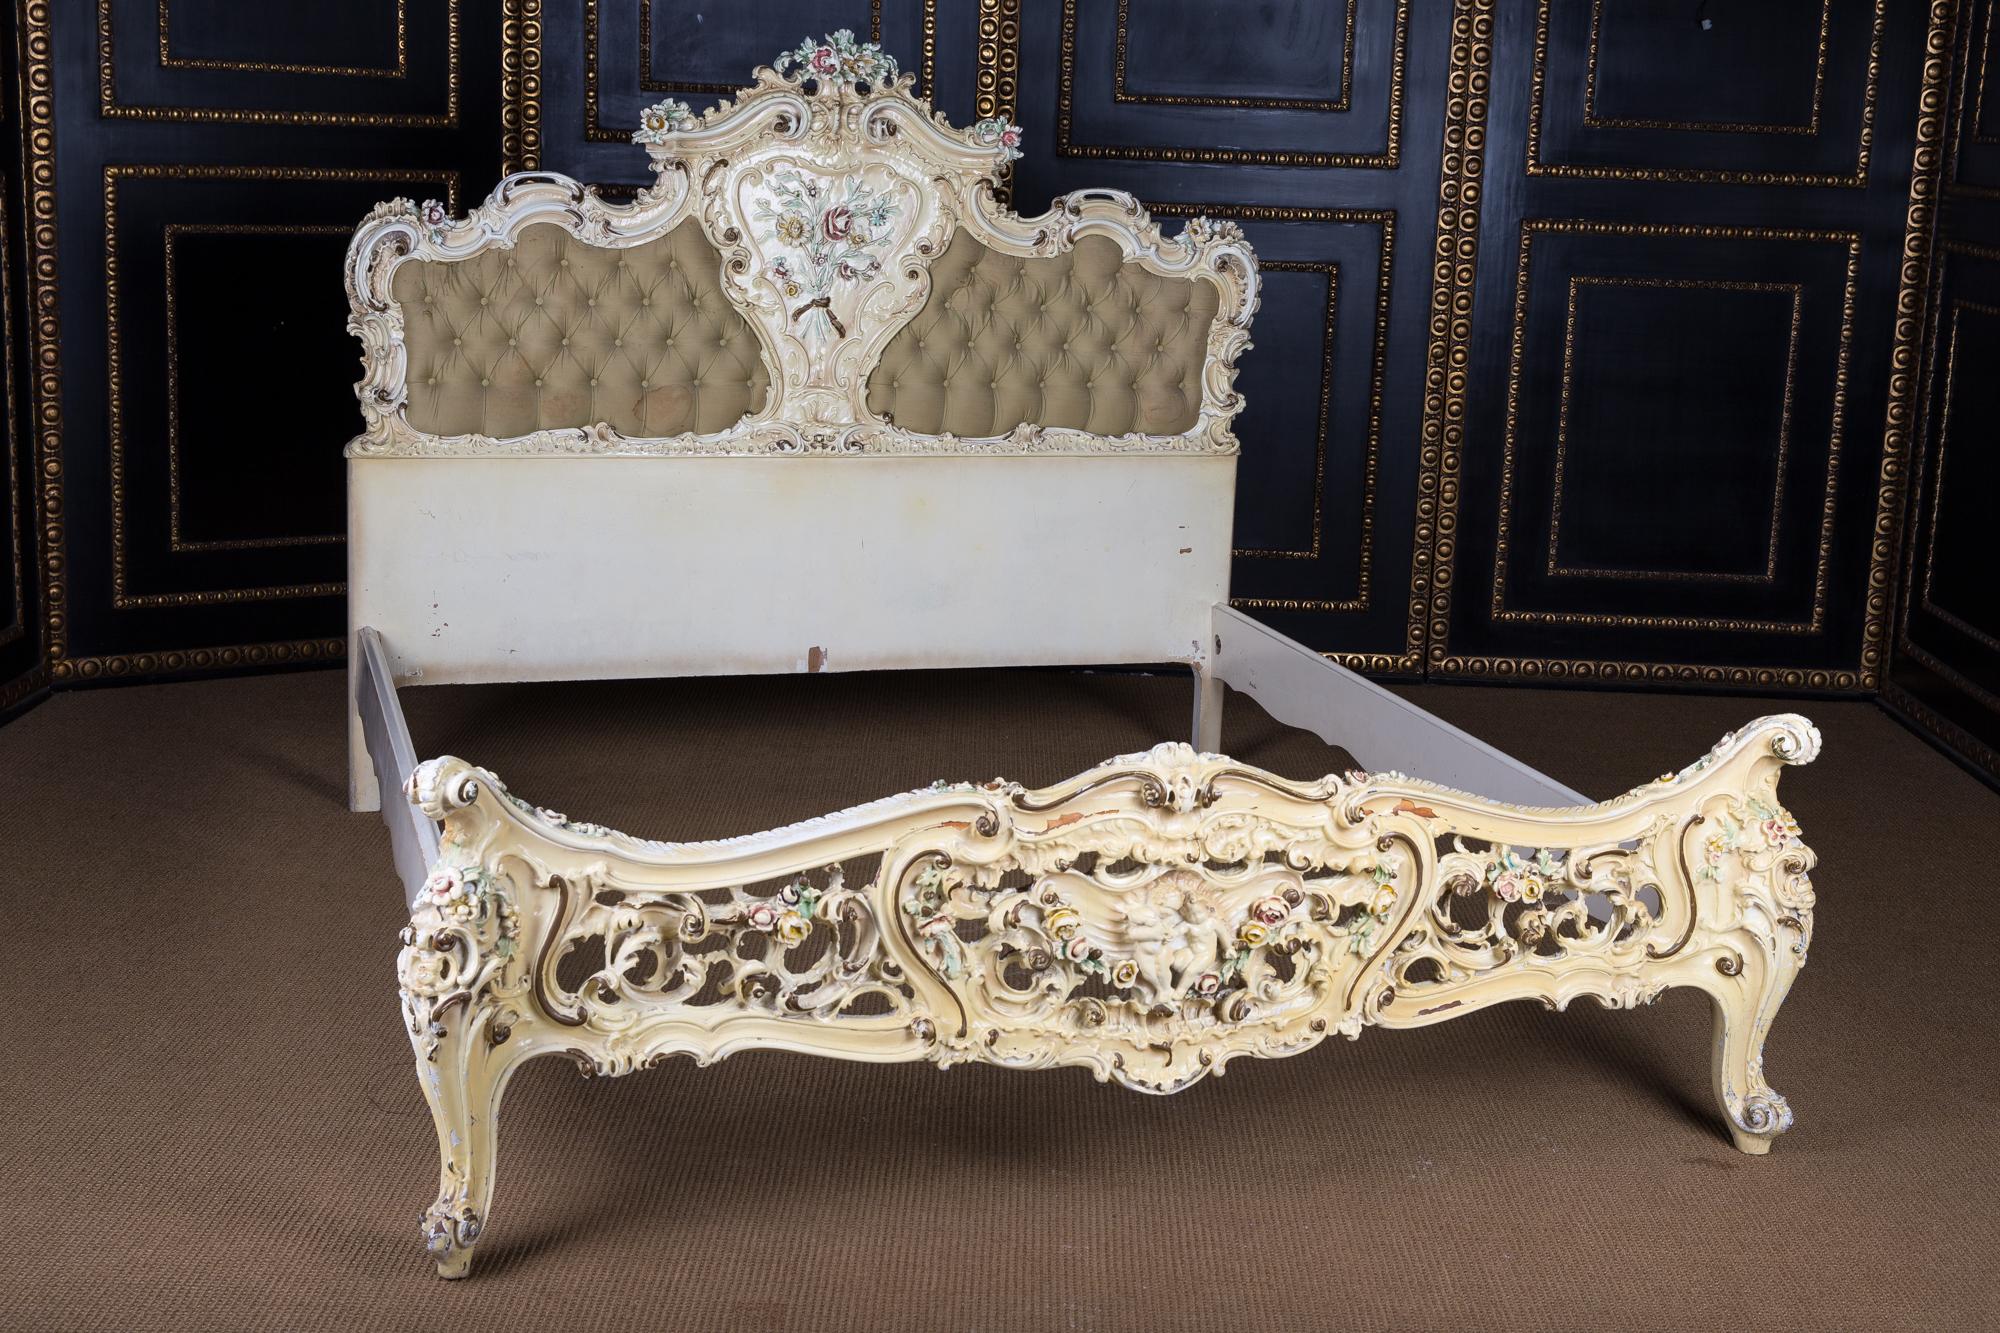 Beautiful old bed of Venizian rich flowers carvings.
solid wood.
Dimensions.
Length: 210 cm
Width: 177
Height: 147 cm
inside dimensions.
Width: 160 cm
Length: 200 cm.